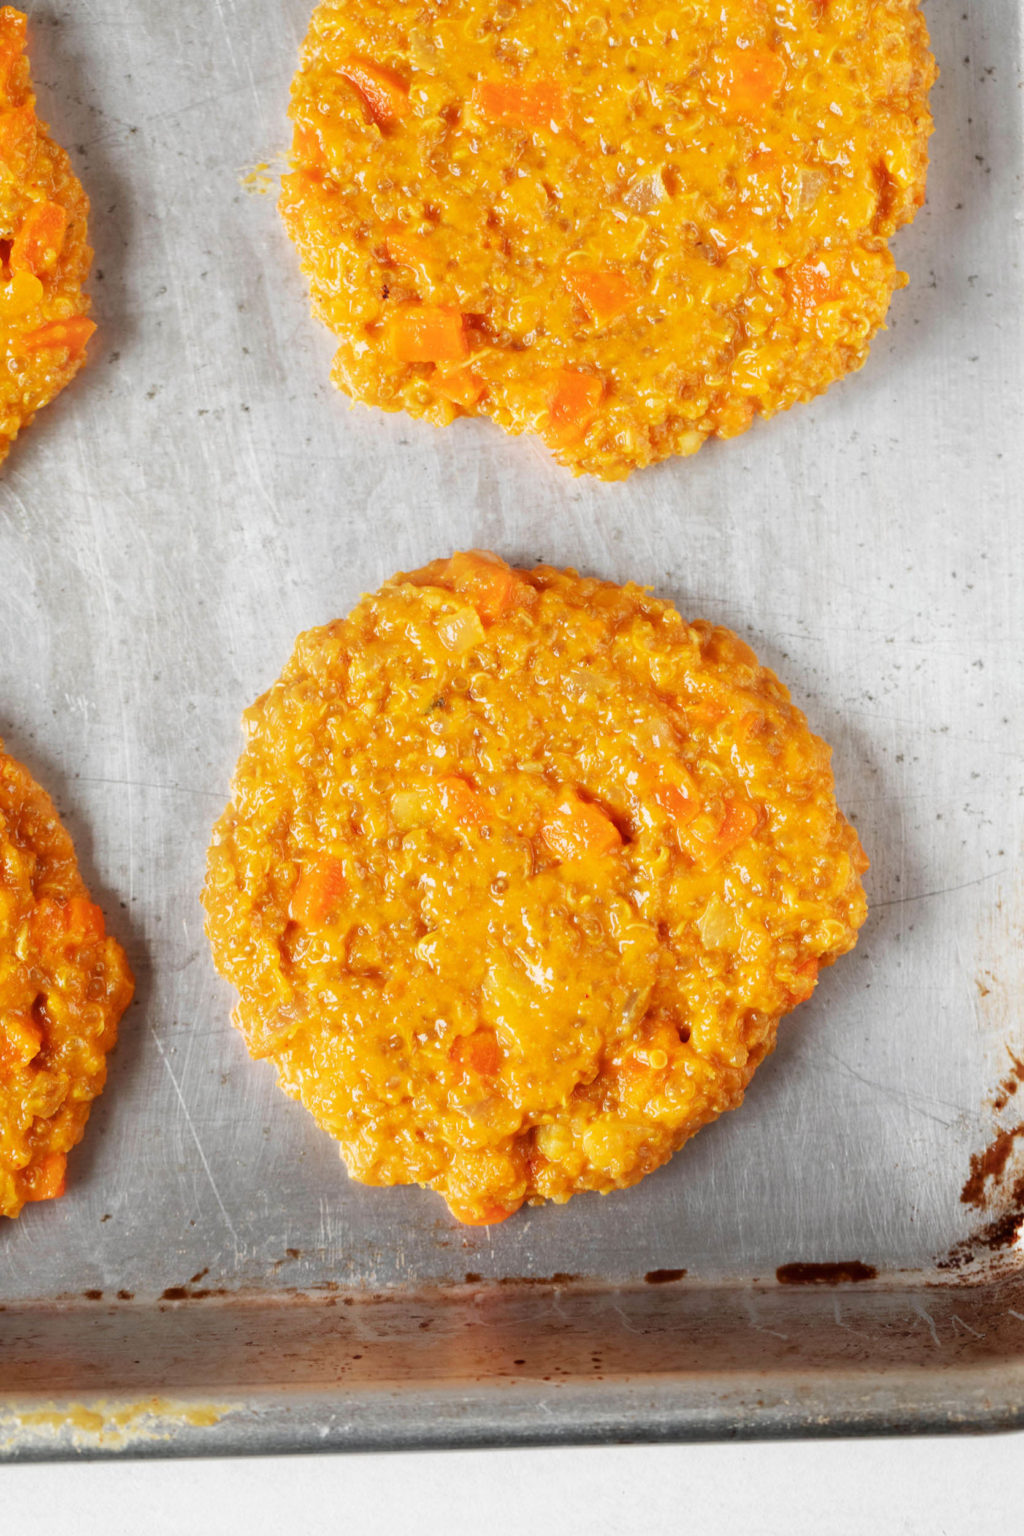 Golden-colored, plant-based patties are resting on a parchment-lined baking sheet, waiting to be baked.